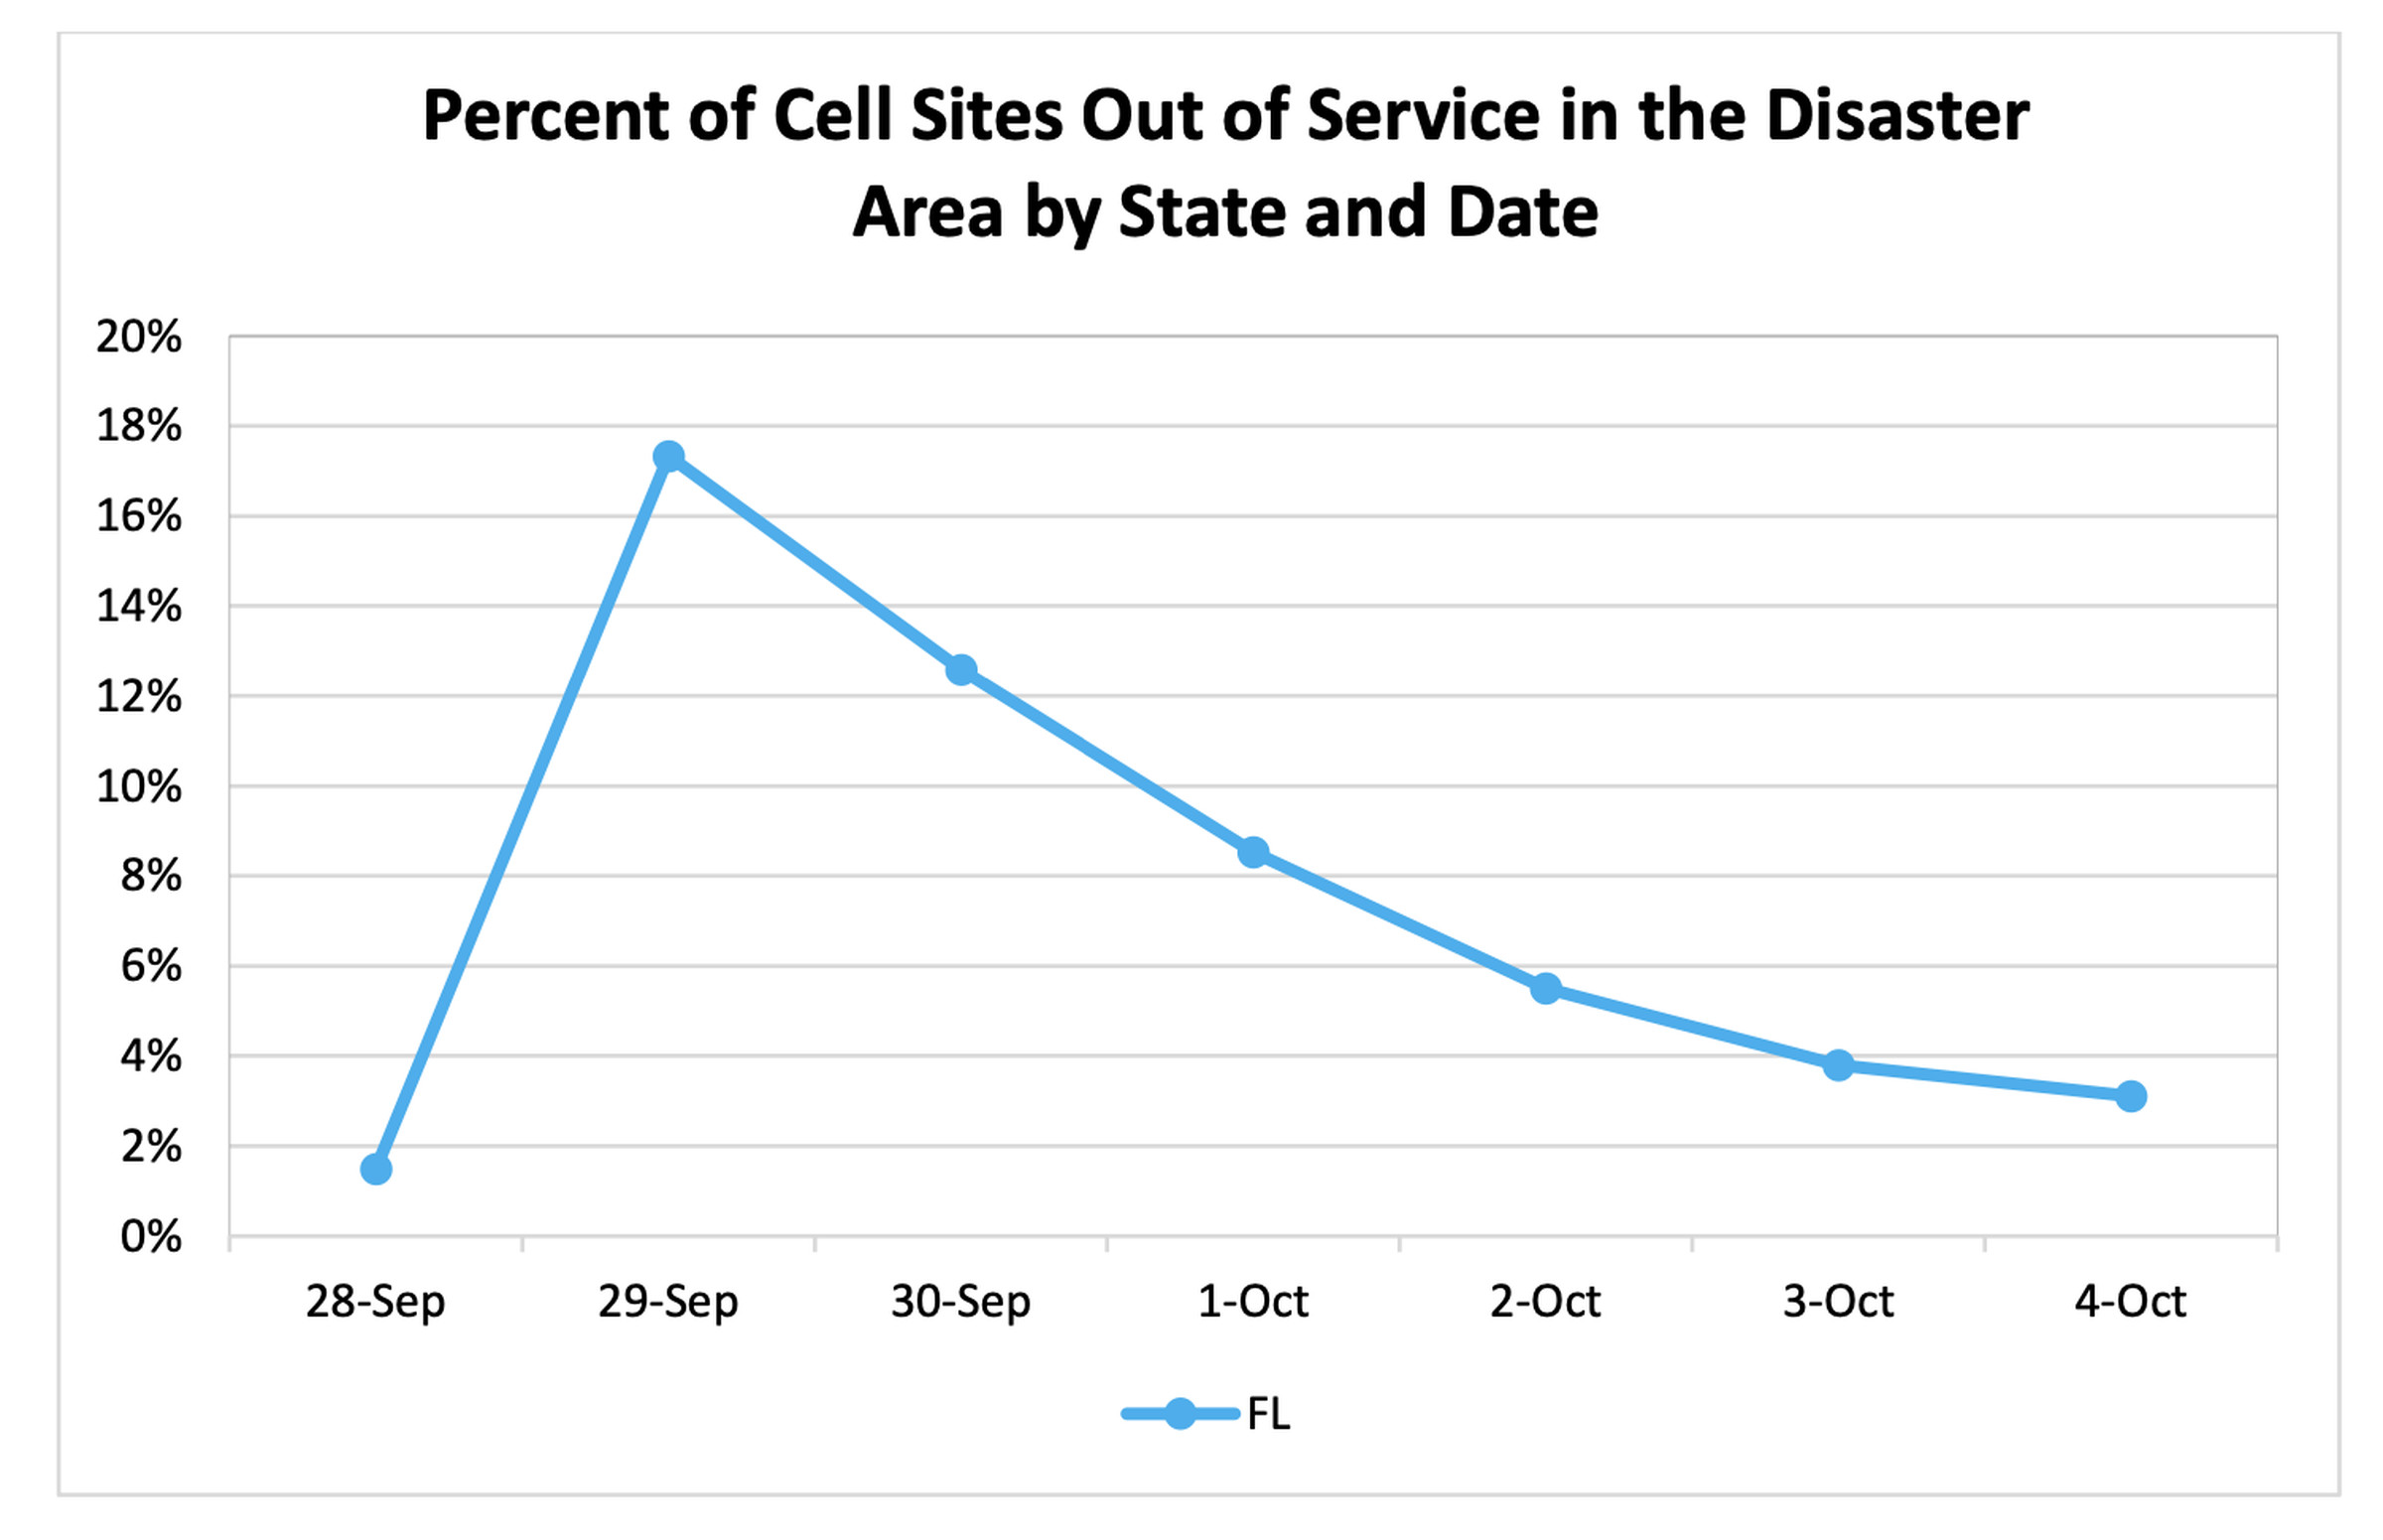 Chart showing the percent of cell sites out of service in the disaster area by date. It shows a sharp increase from September 28th to the 29th, then a gradual decrease from September 30th to October 4th.